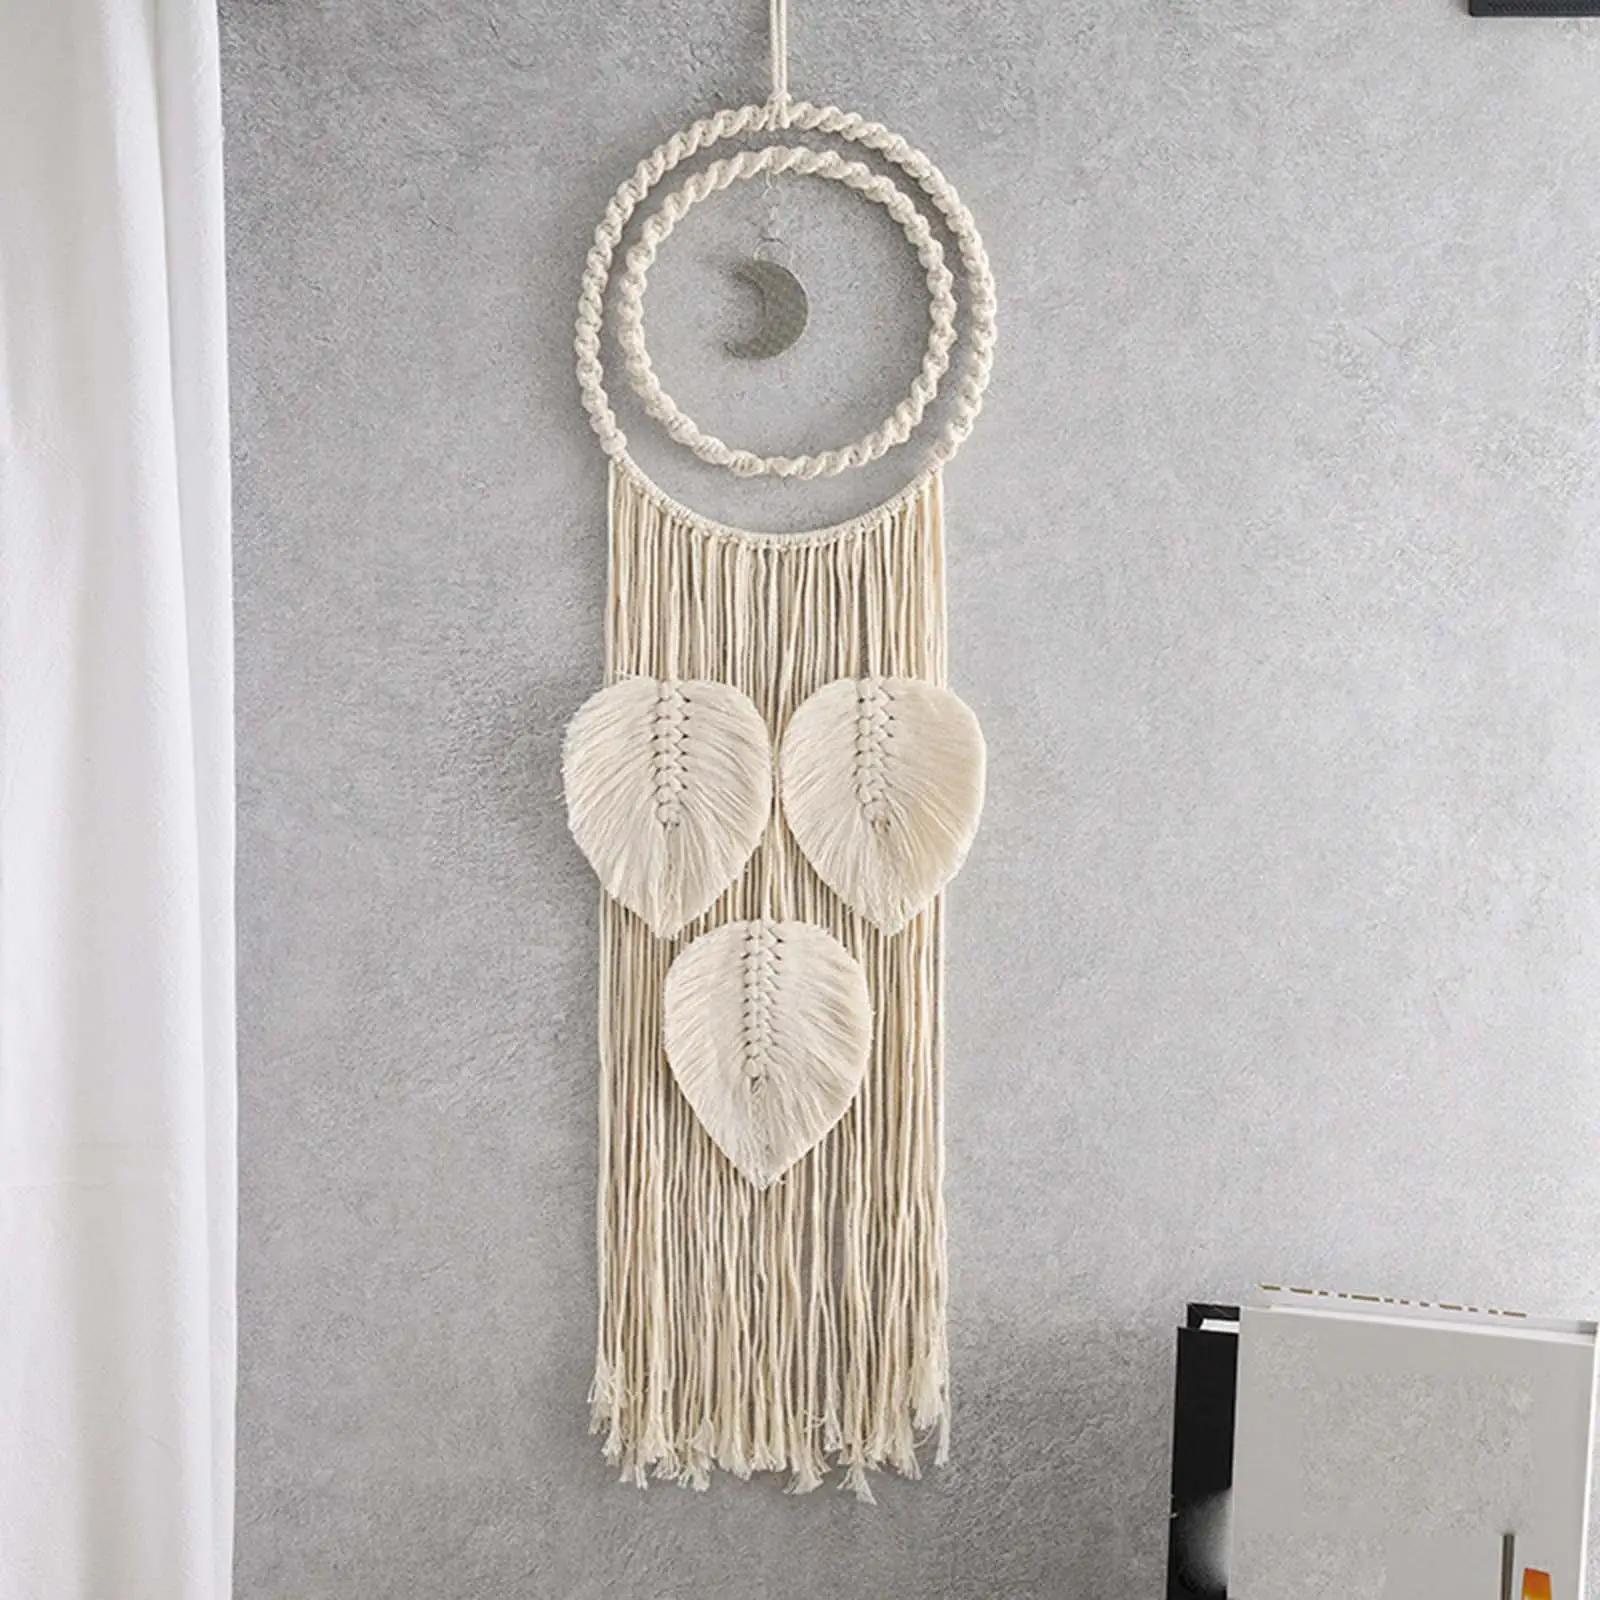  Chic Macrame  Tapestry Hand Woven Wall Hanging Handmade   for Dorm Home Wedding Bedroom Decor